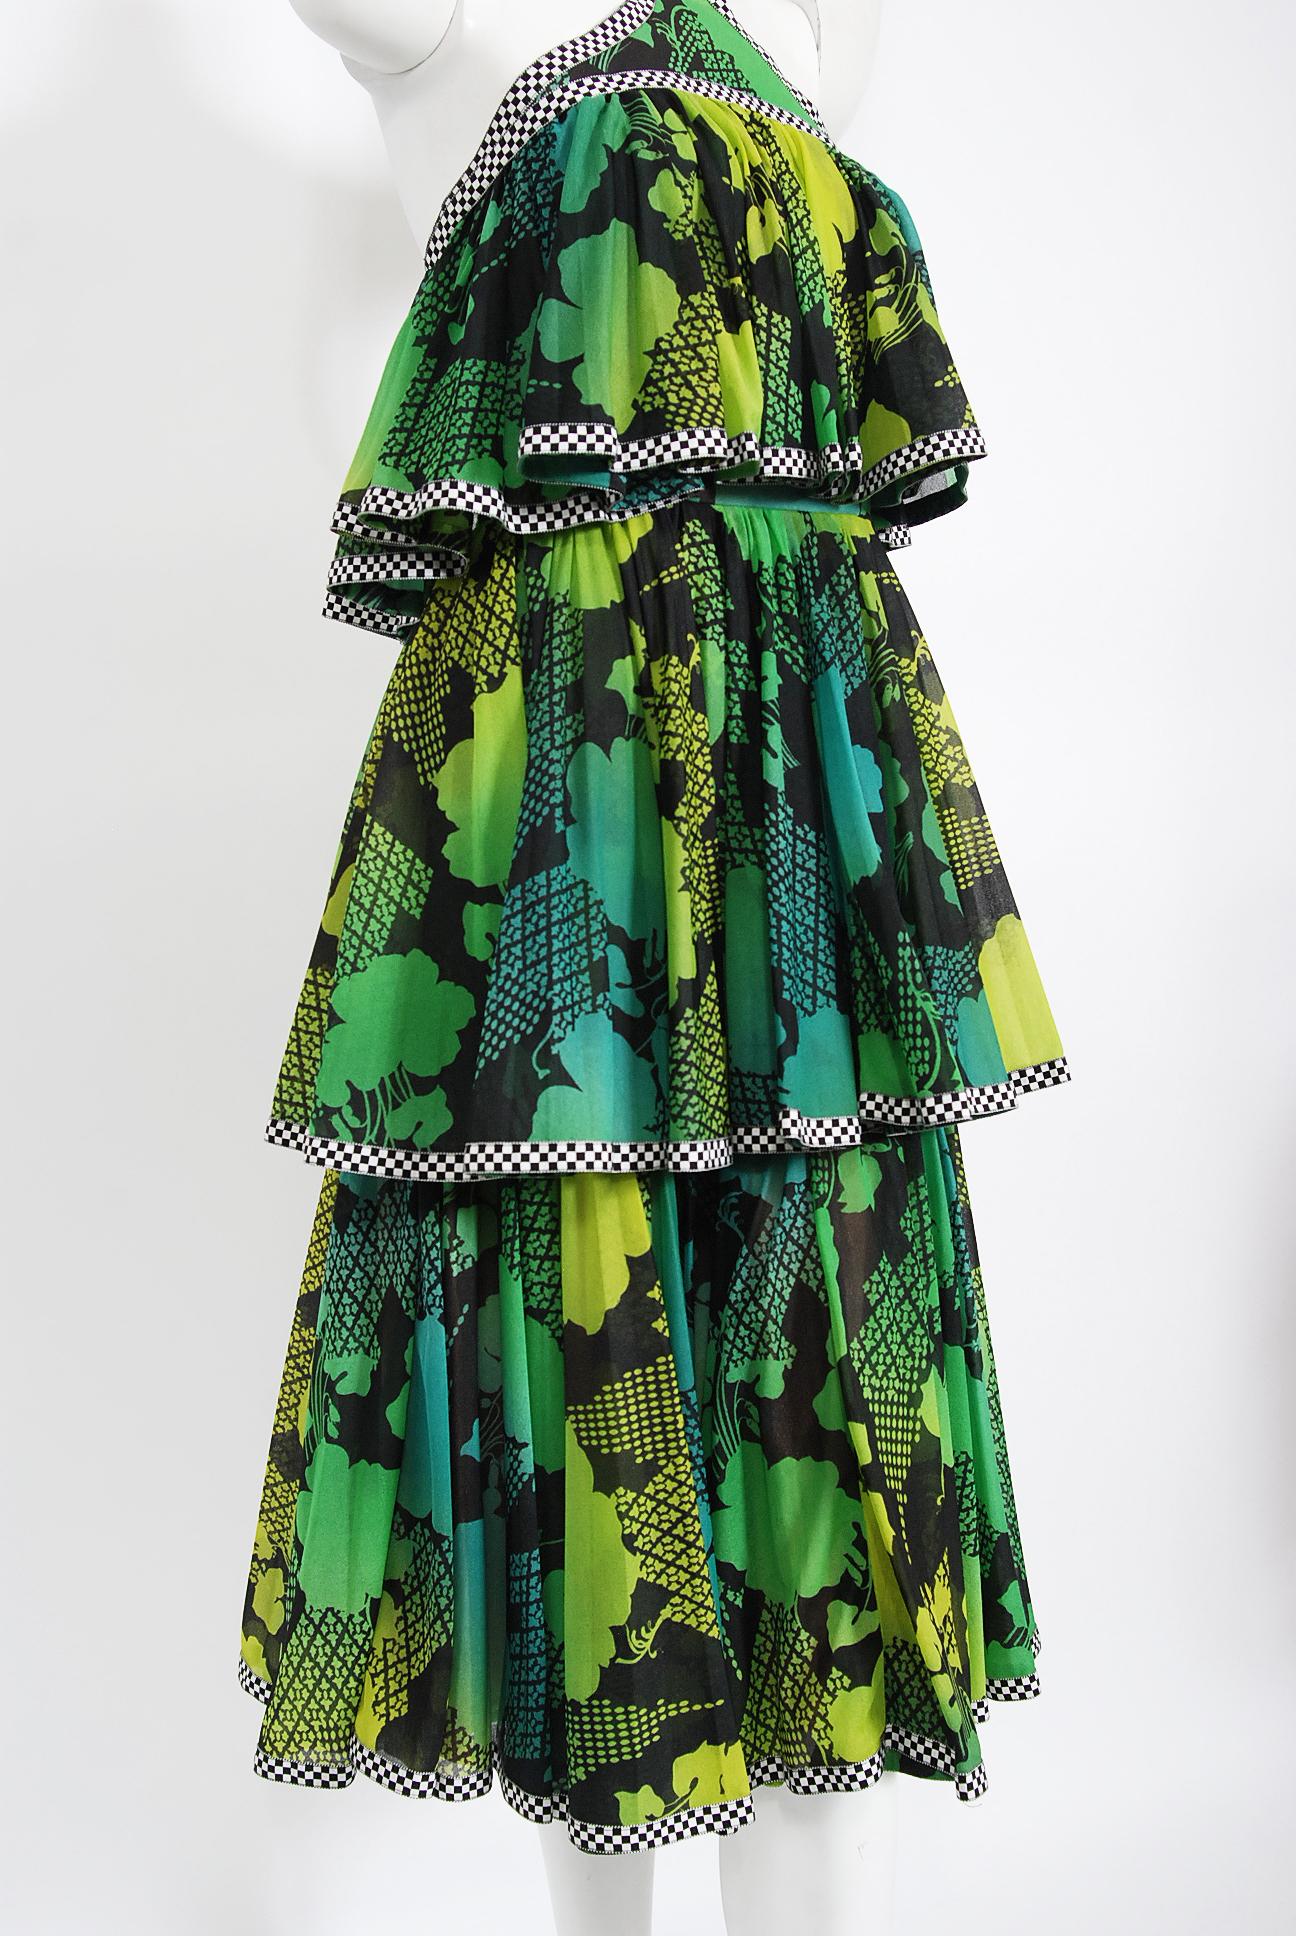 Vintage 1970's Jean Varon Green Graphic Floral Print Pleated Tiered Halter Dress In Good Condition For Sale In Beverly Hills, CA